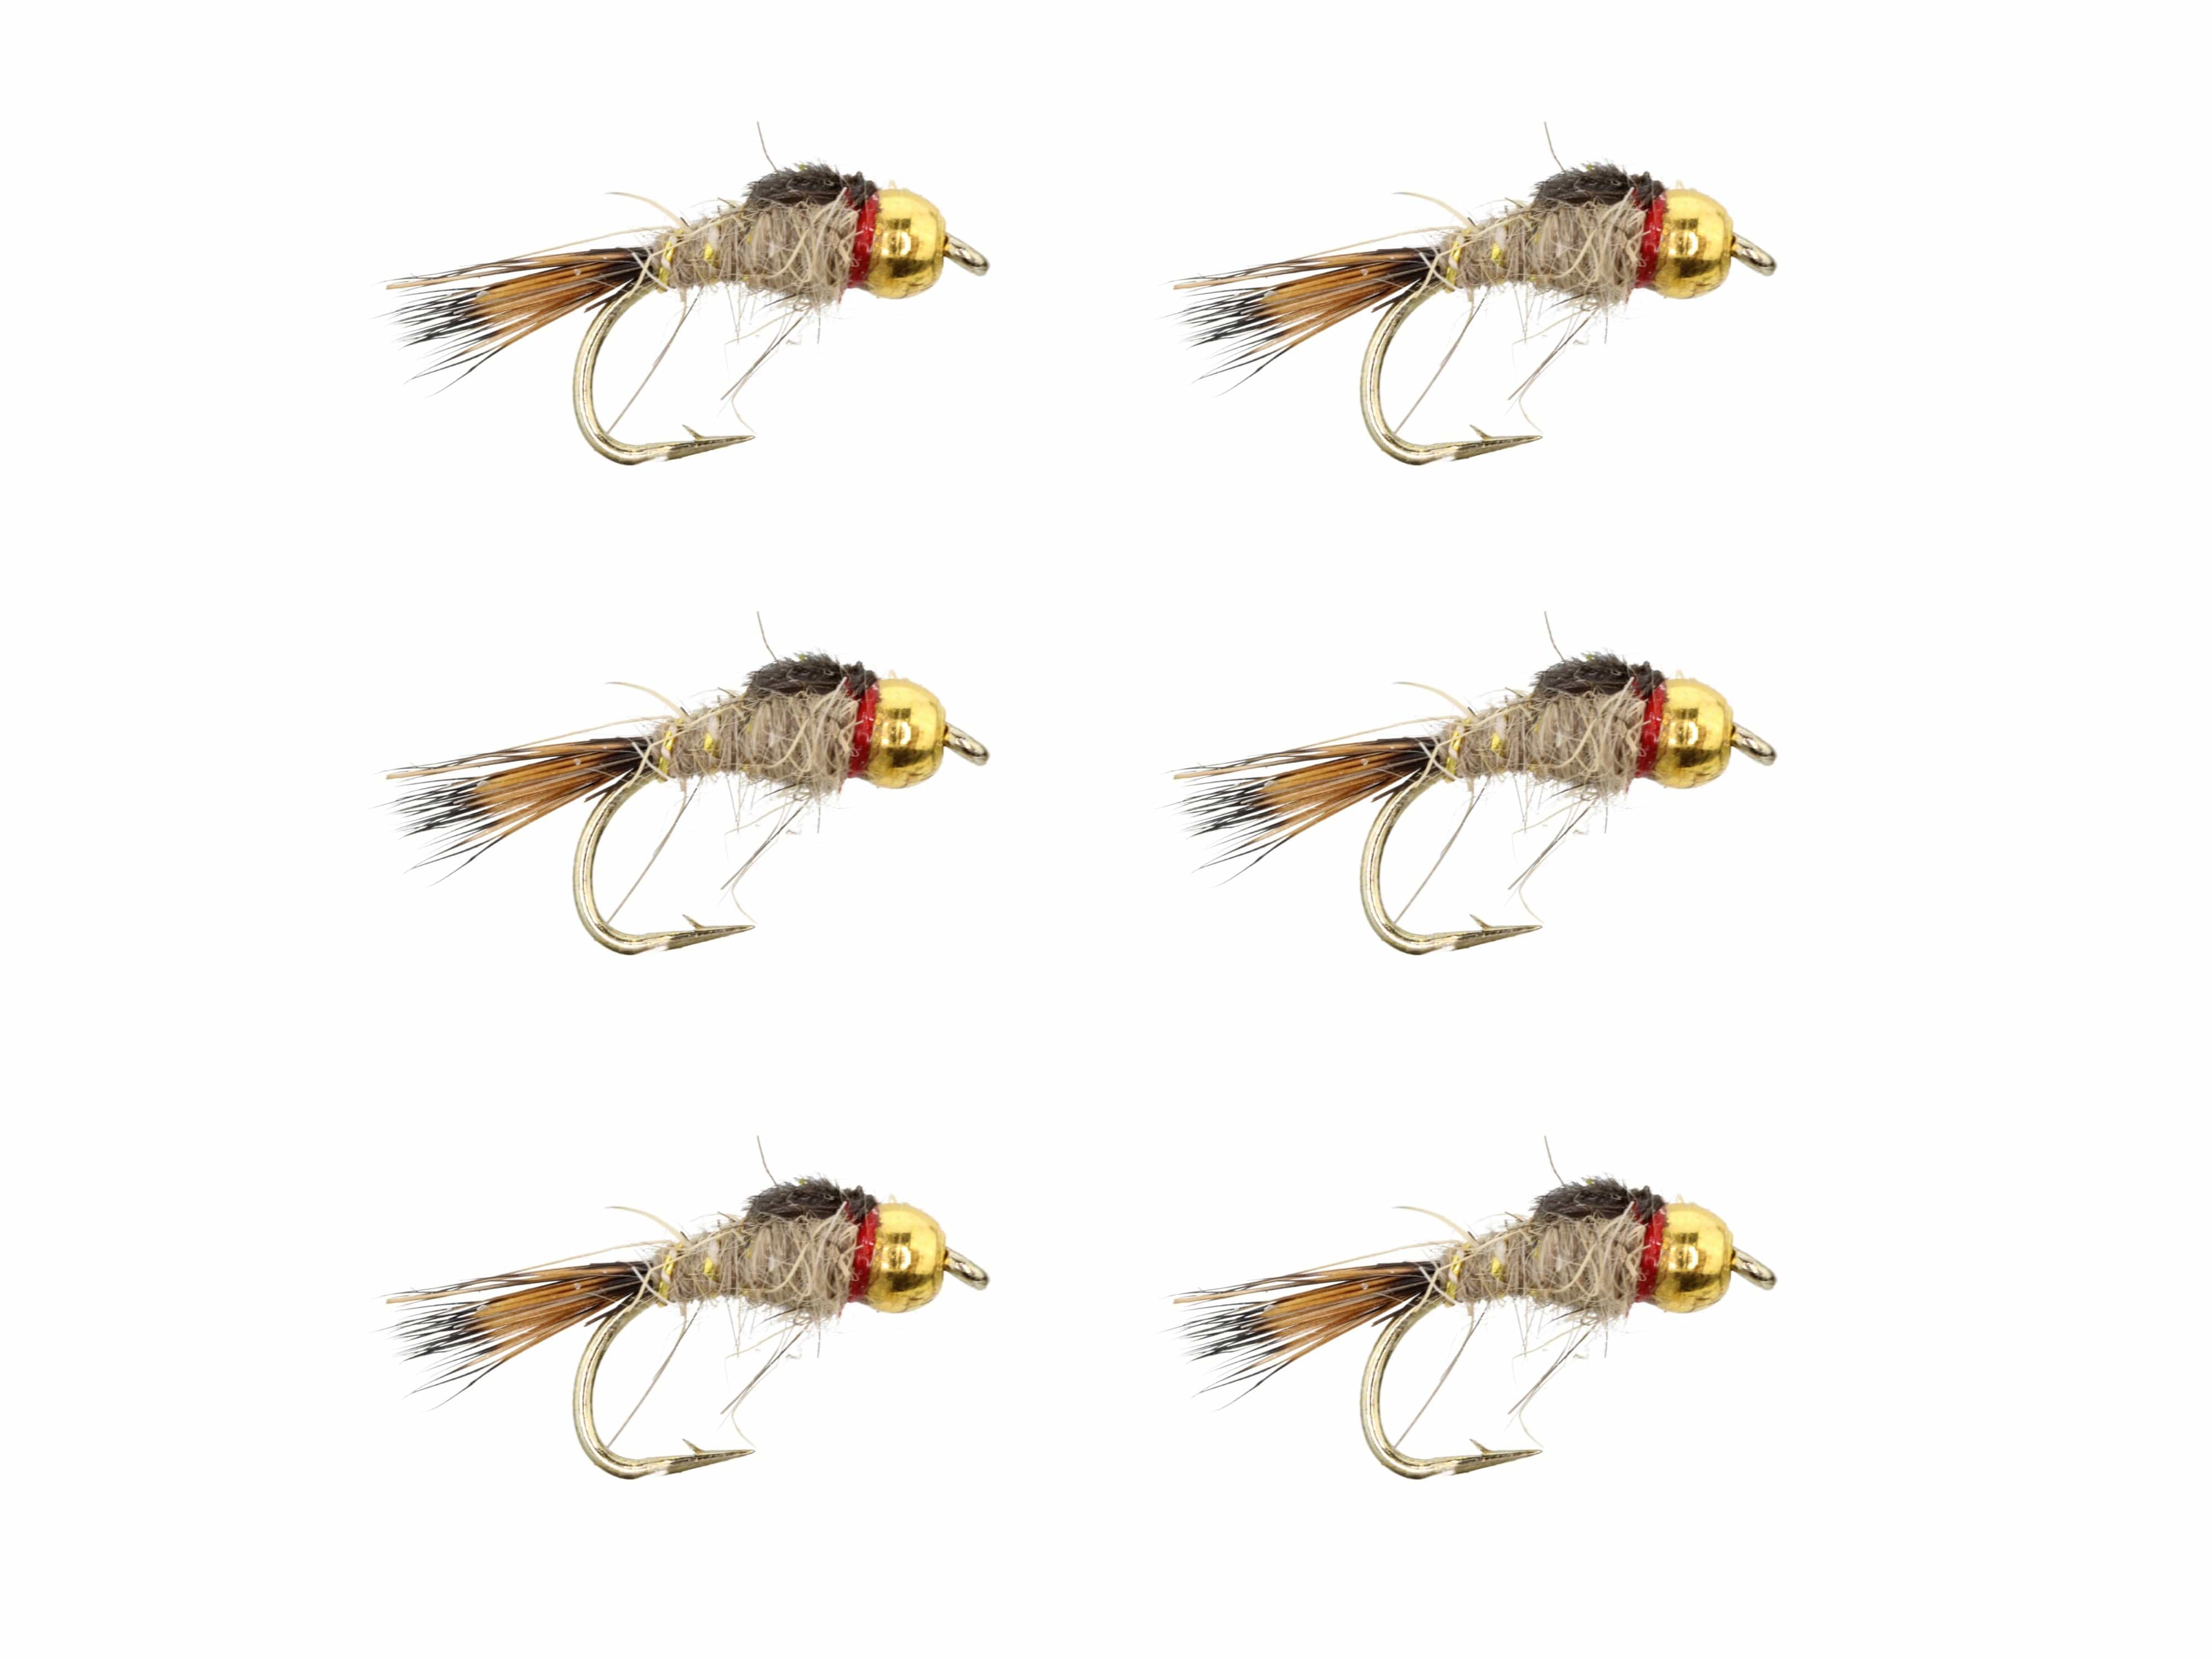 Wild Water Fly Fishing Gold Ribbed Hare's Ear Bead Head Nymph, Size 14, Qty. 6